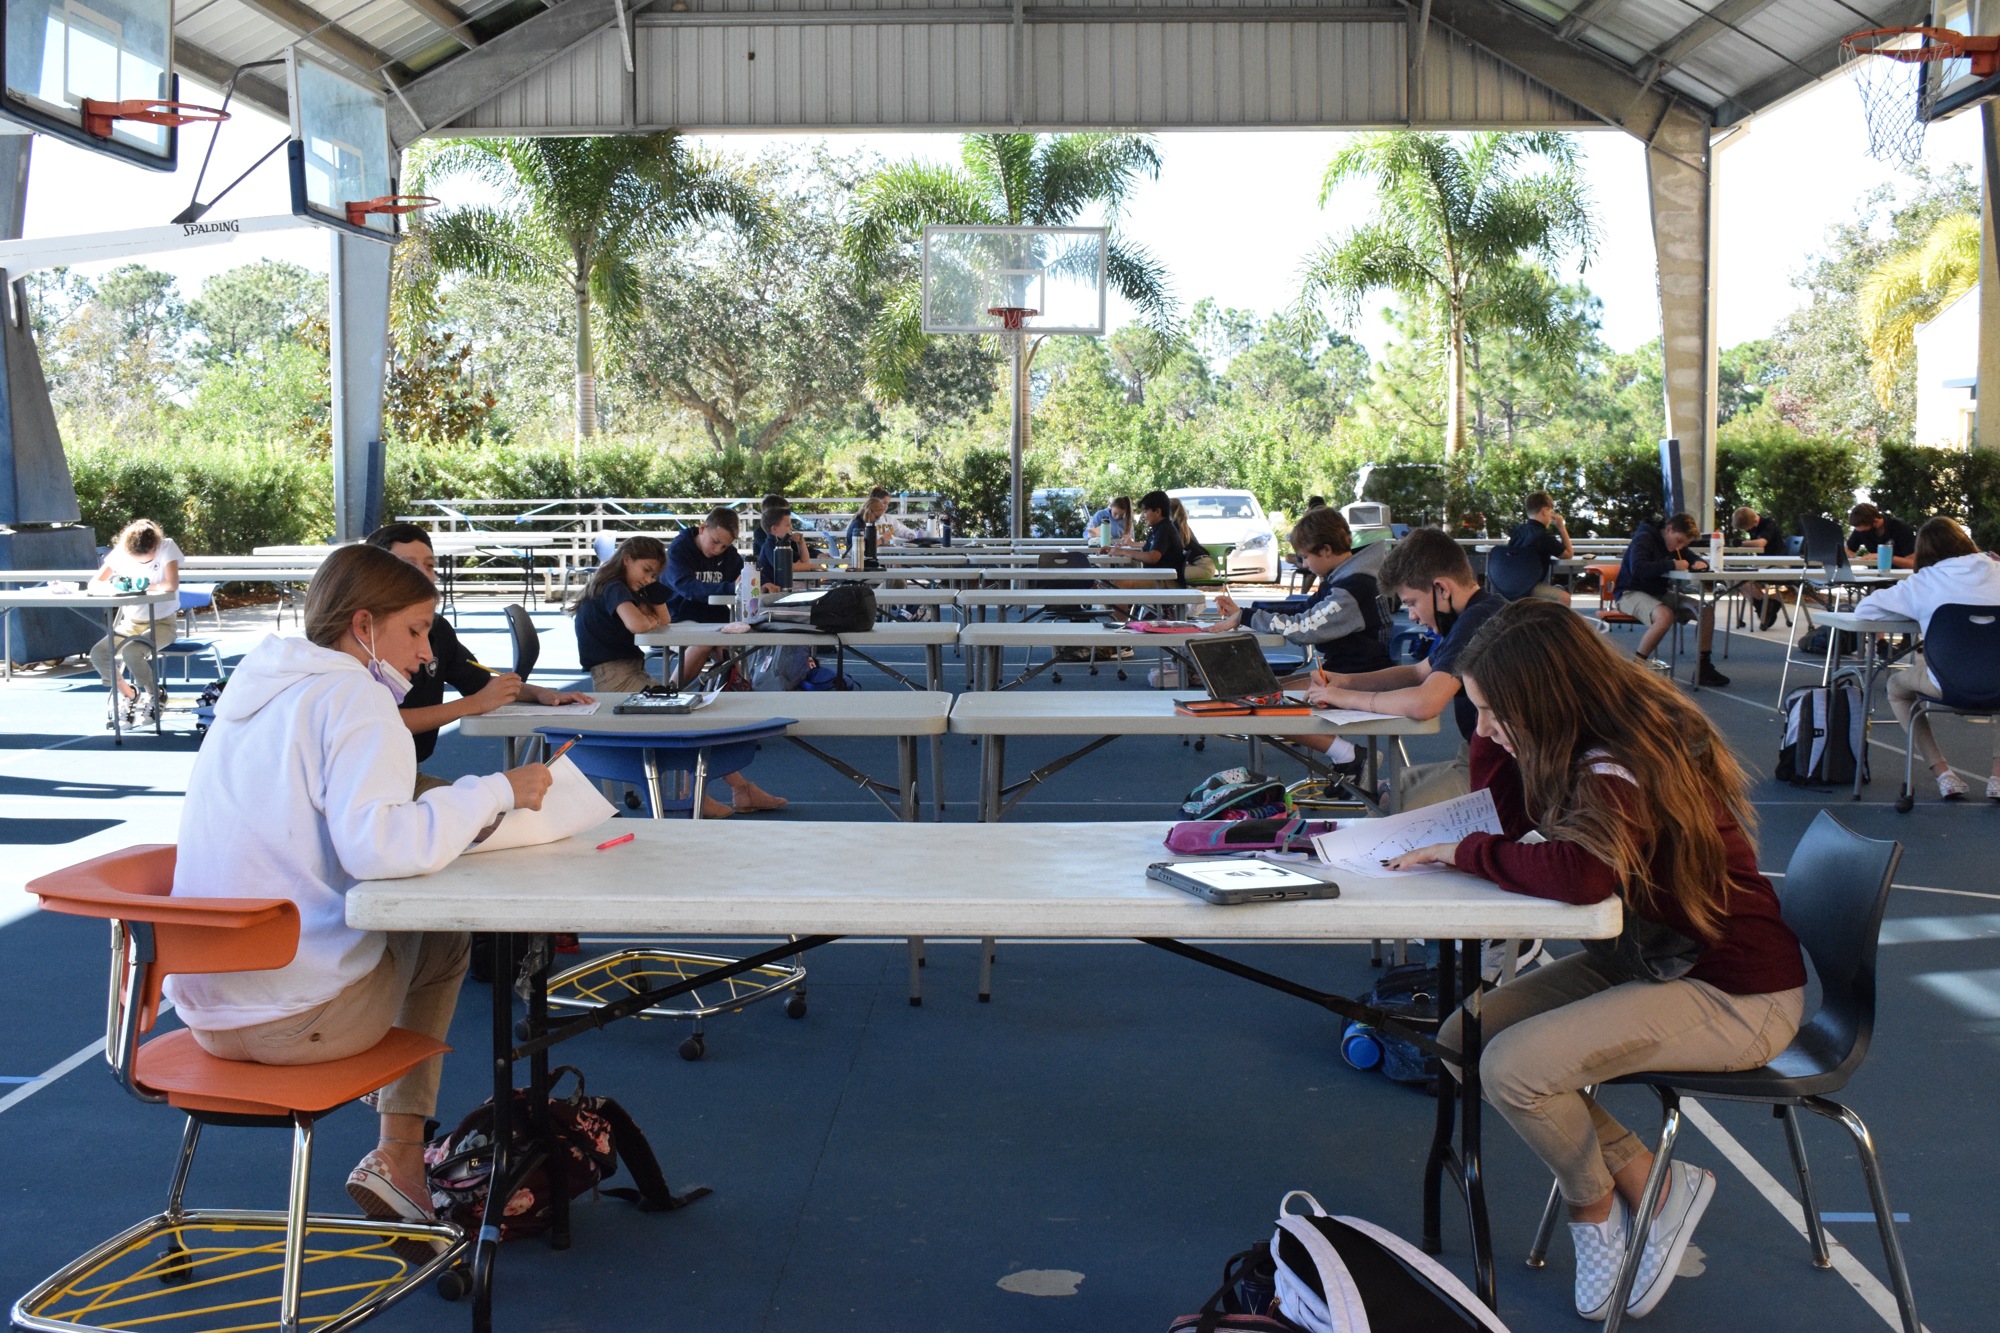 A geography class is purposefully scheduled to be held on the basketball courts to take advantage of the outdoor space.